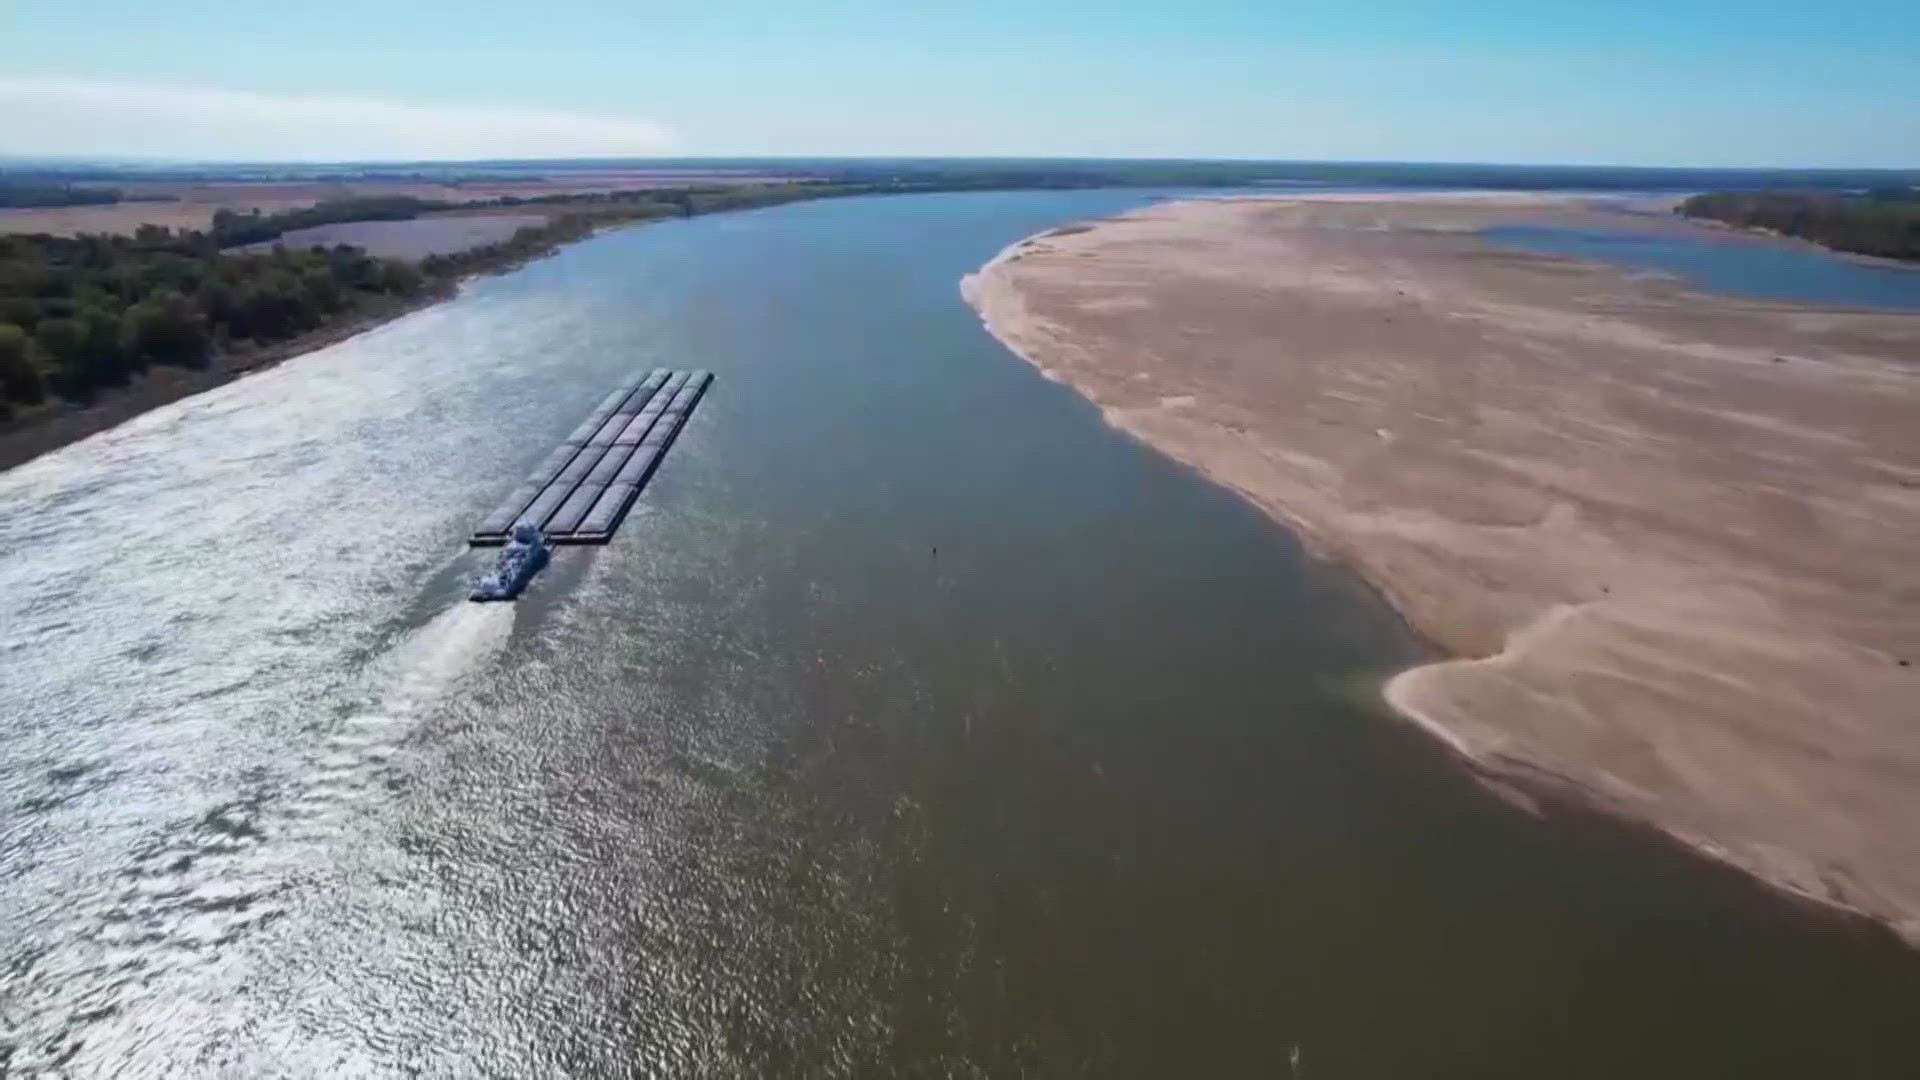 The Army Corps of Engineers says the saltwater wedge coming up the Mississippi River from the Gulf is now a top priority at the highest levels of government.